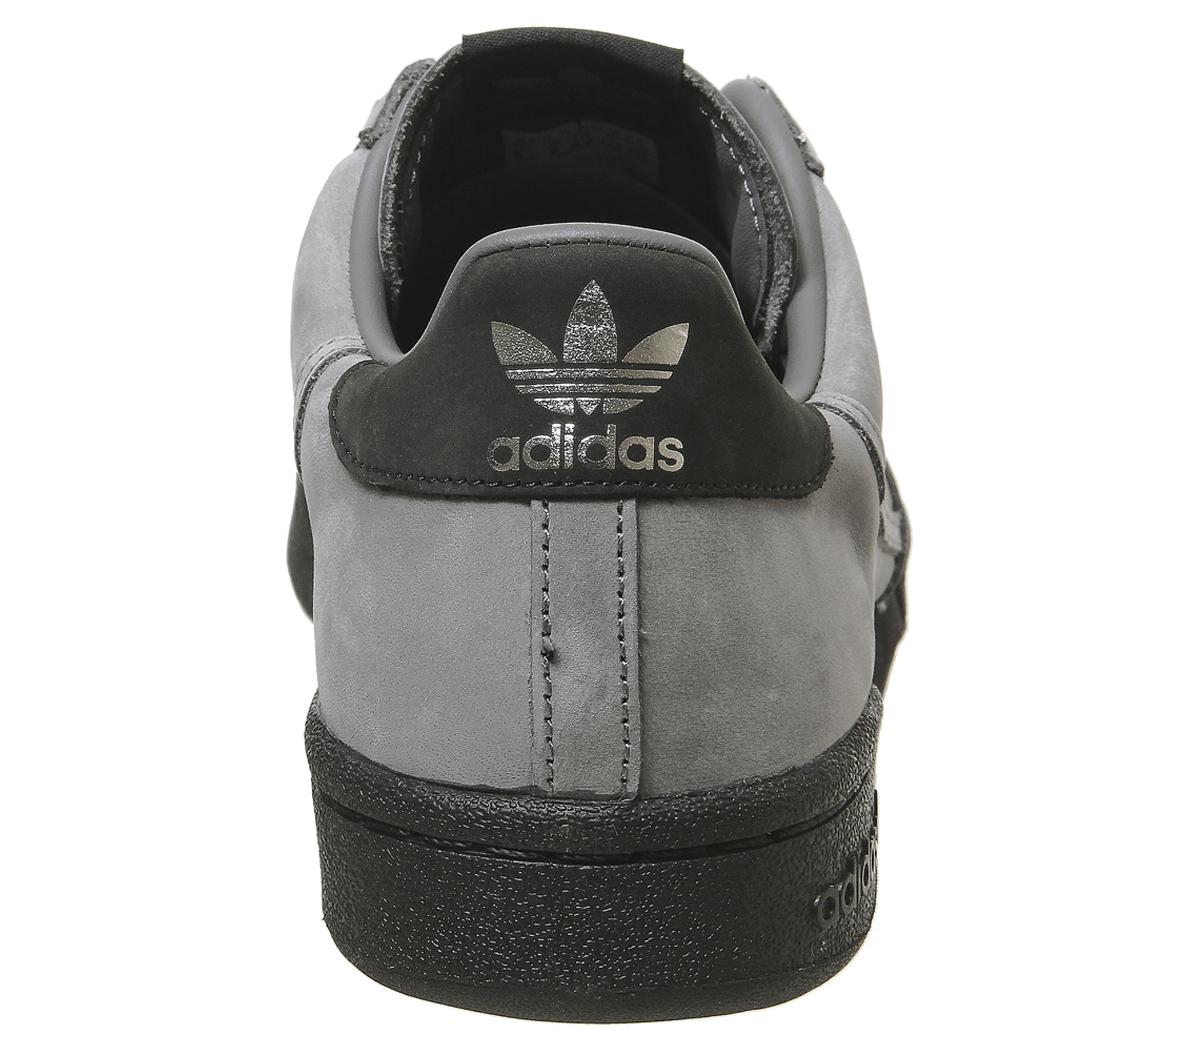 continental 80s trainers grey four grey four core black